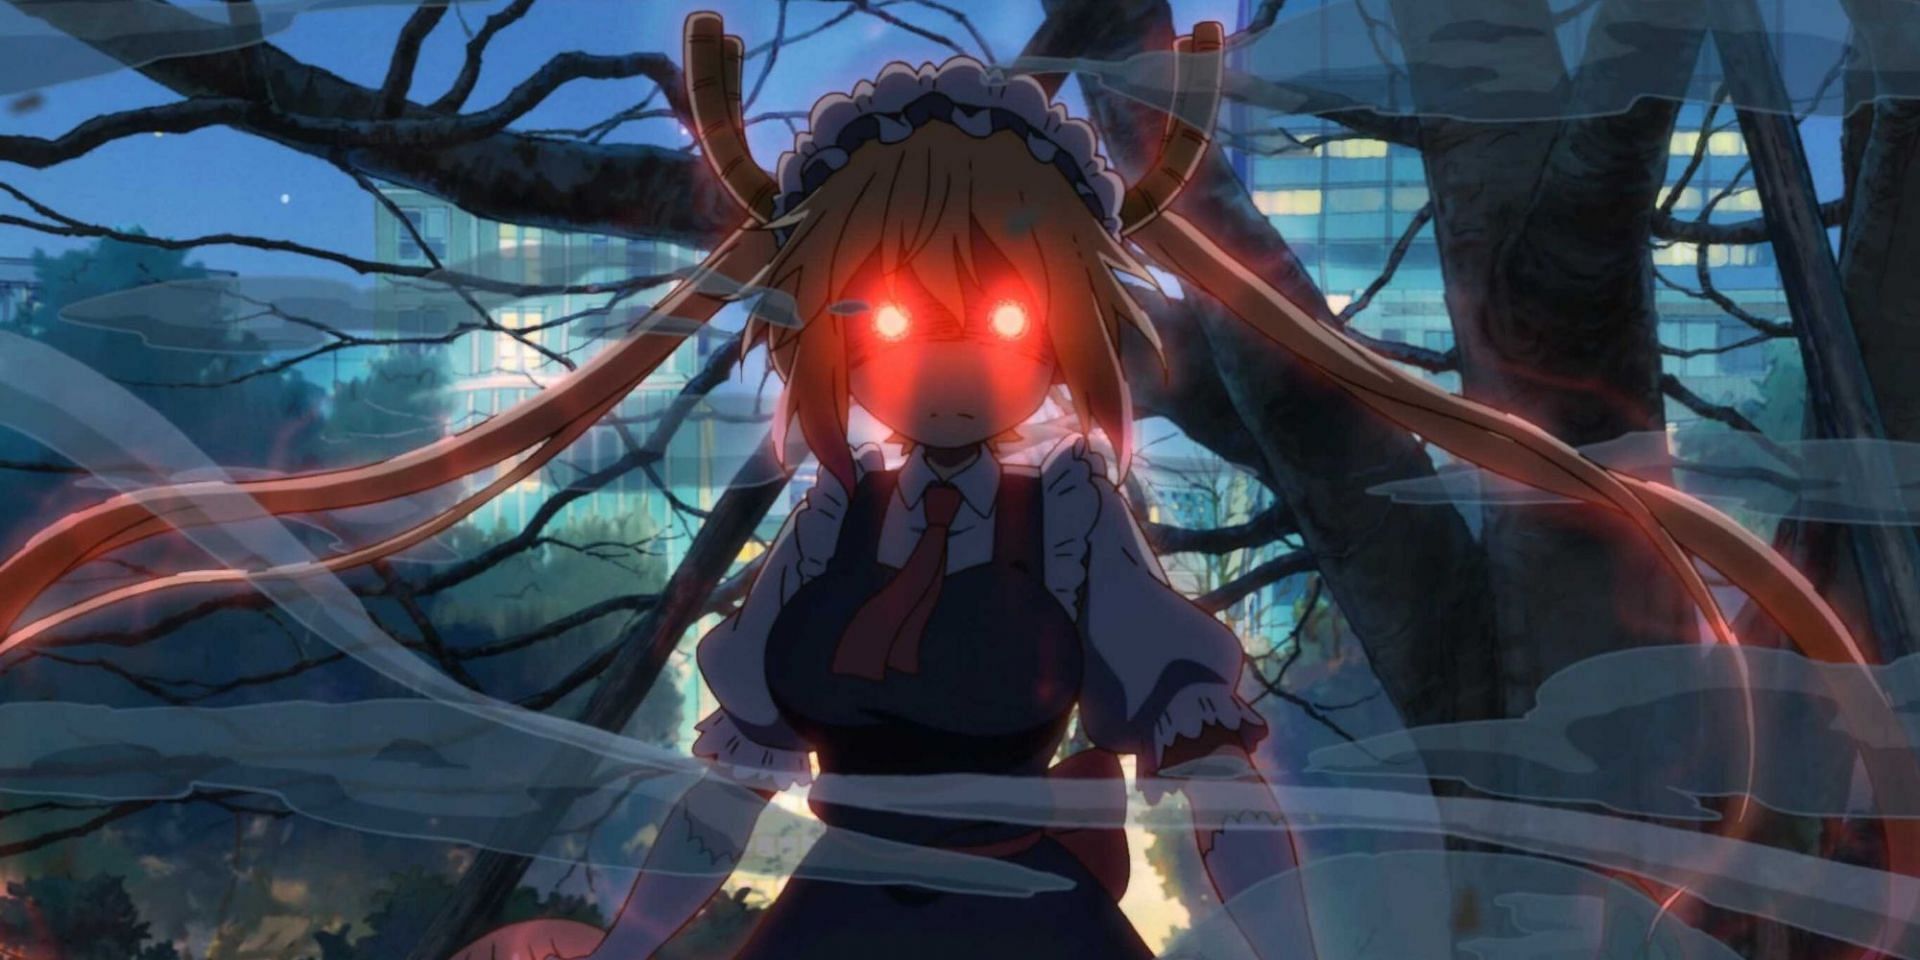 Tohru raging in the anime (Image via Kyoto Animation)